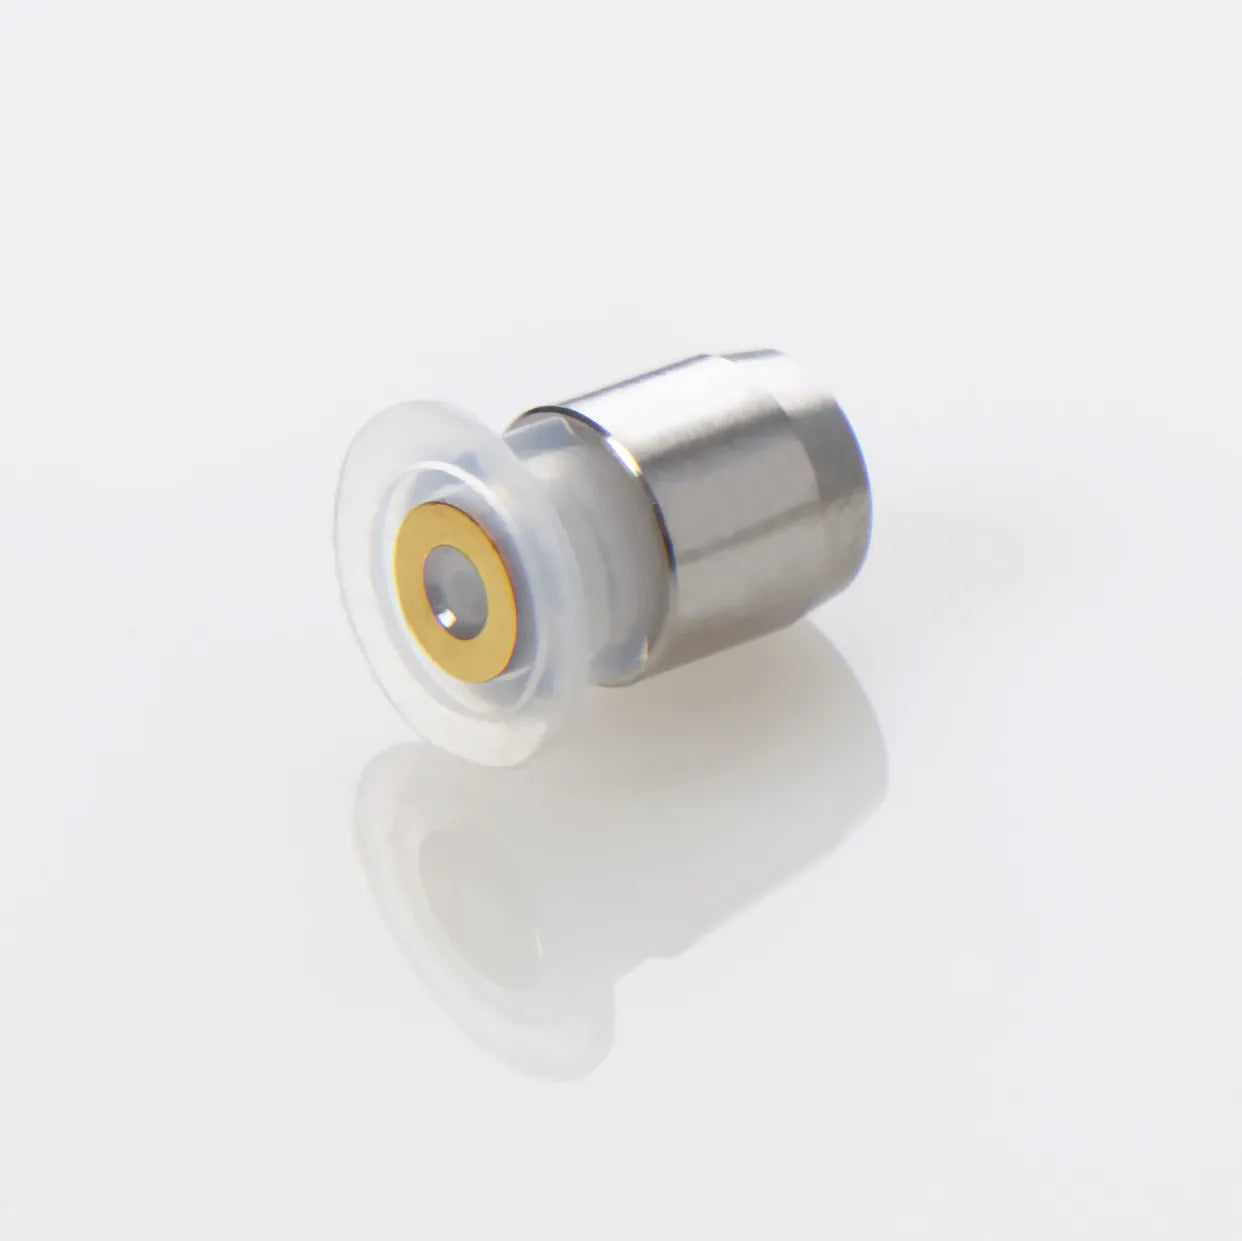 Active Inlet Valve Cartridge (600 bar), Comparable to Agilent # G1312-60020